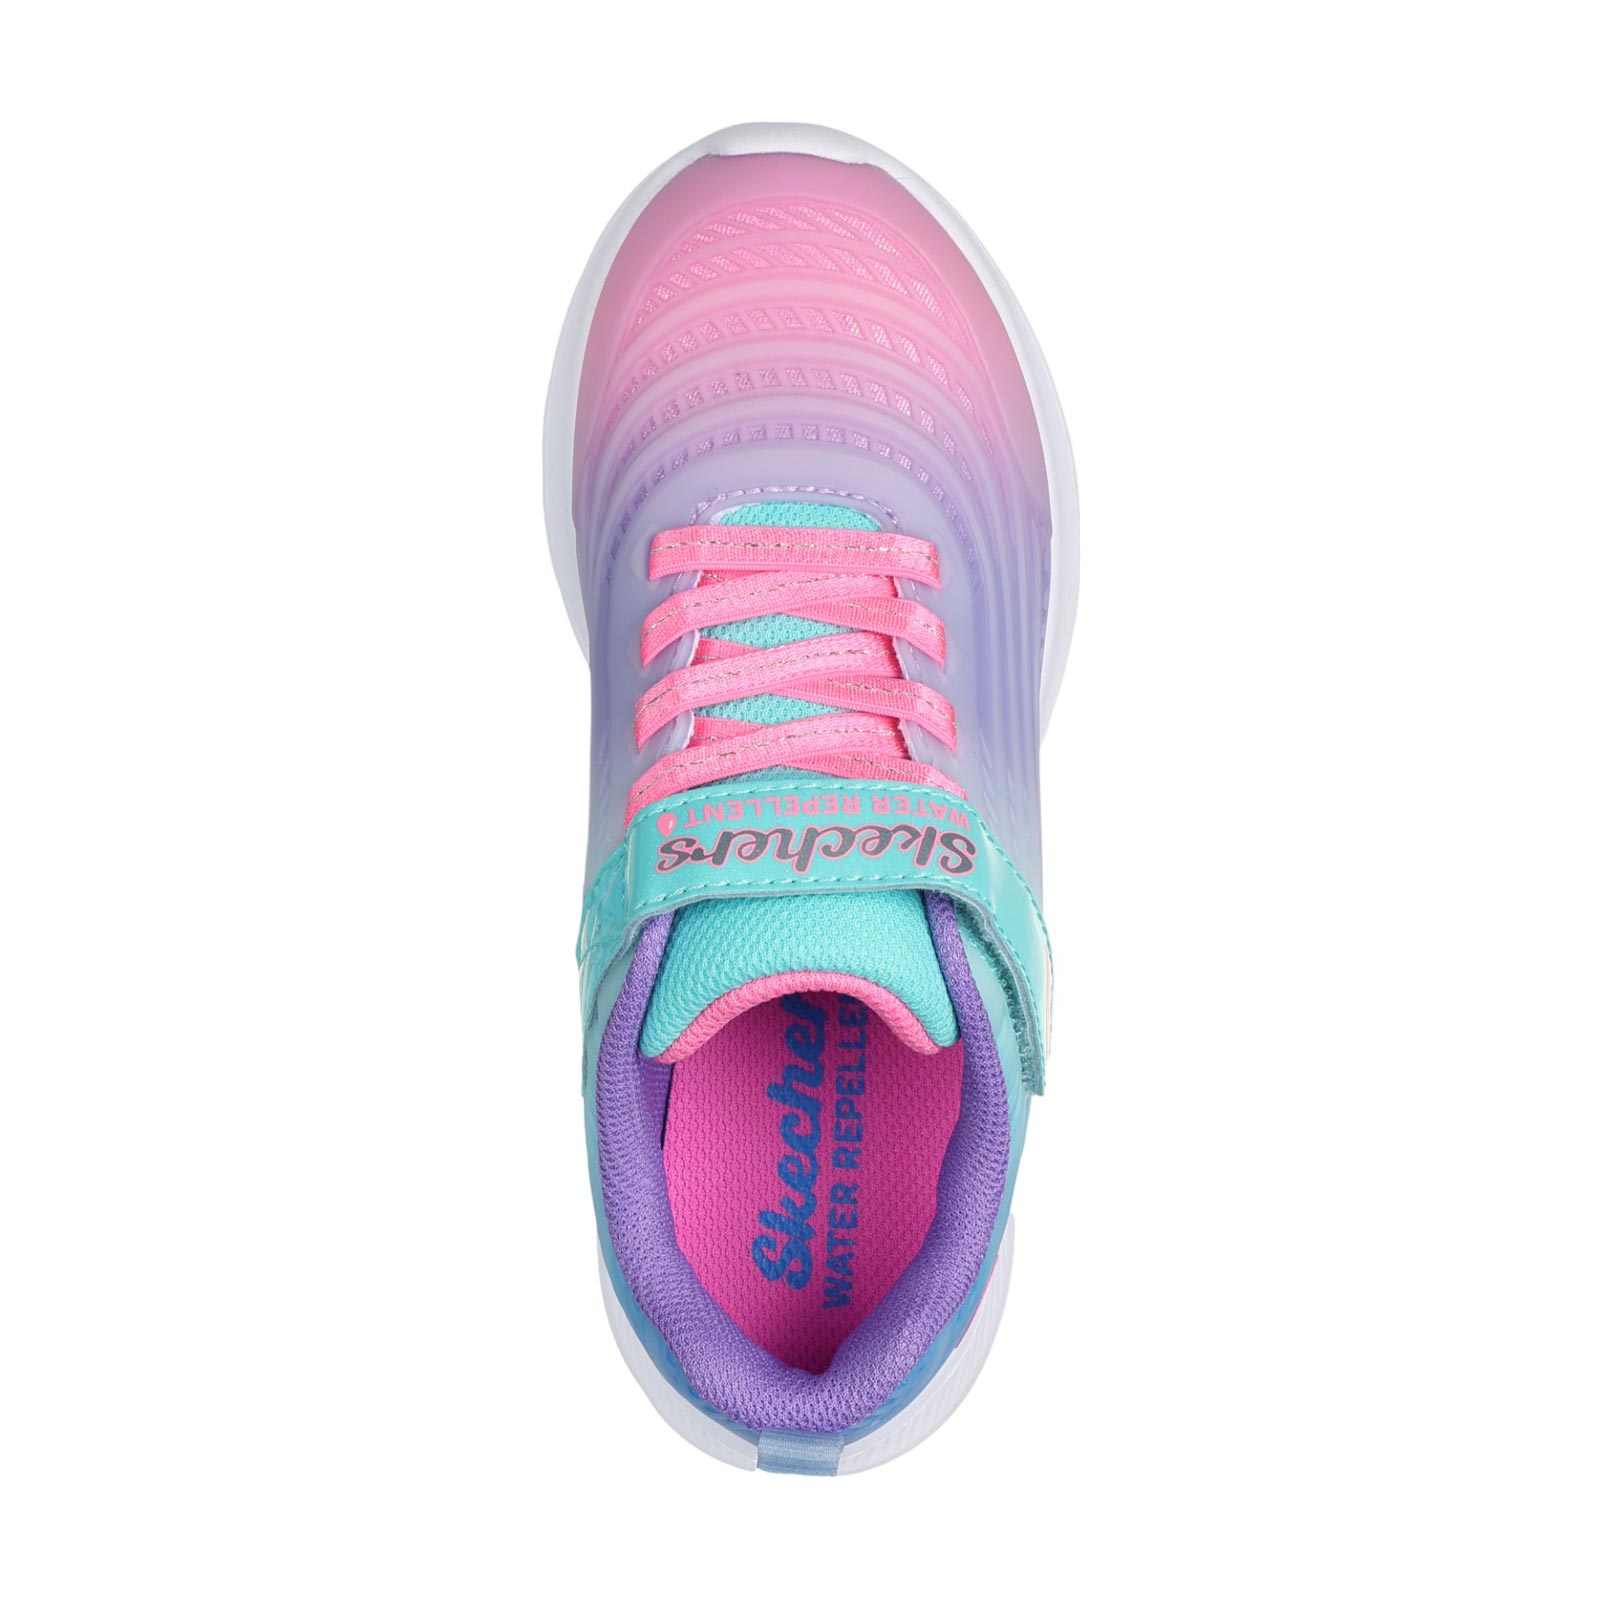 SKECHERS JUMPSTERS 2.0 BLURRED DREAMS GIRLS SHOES